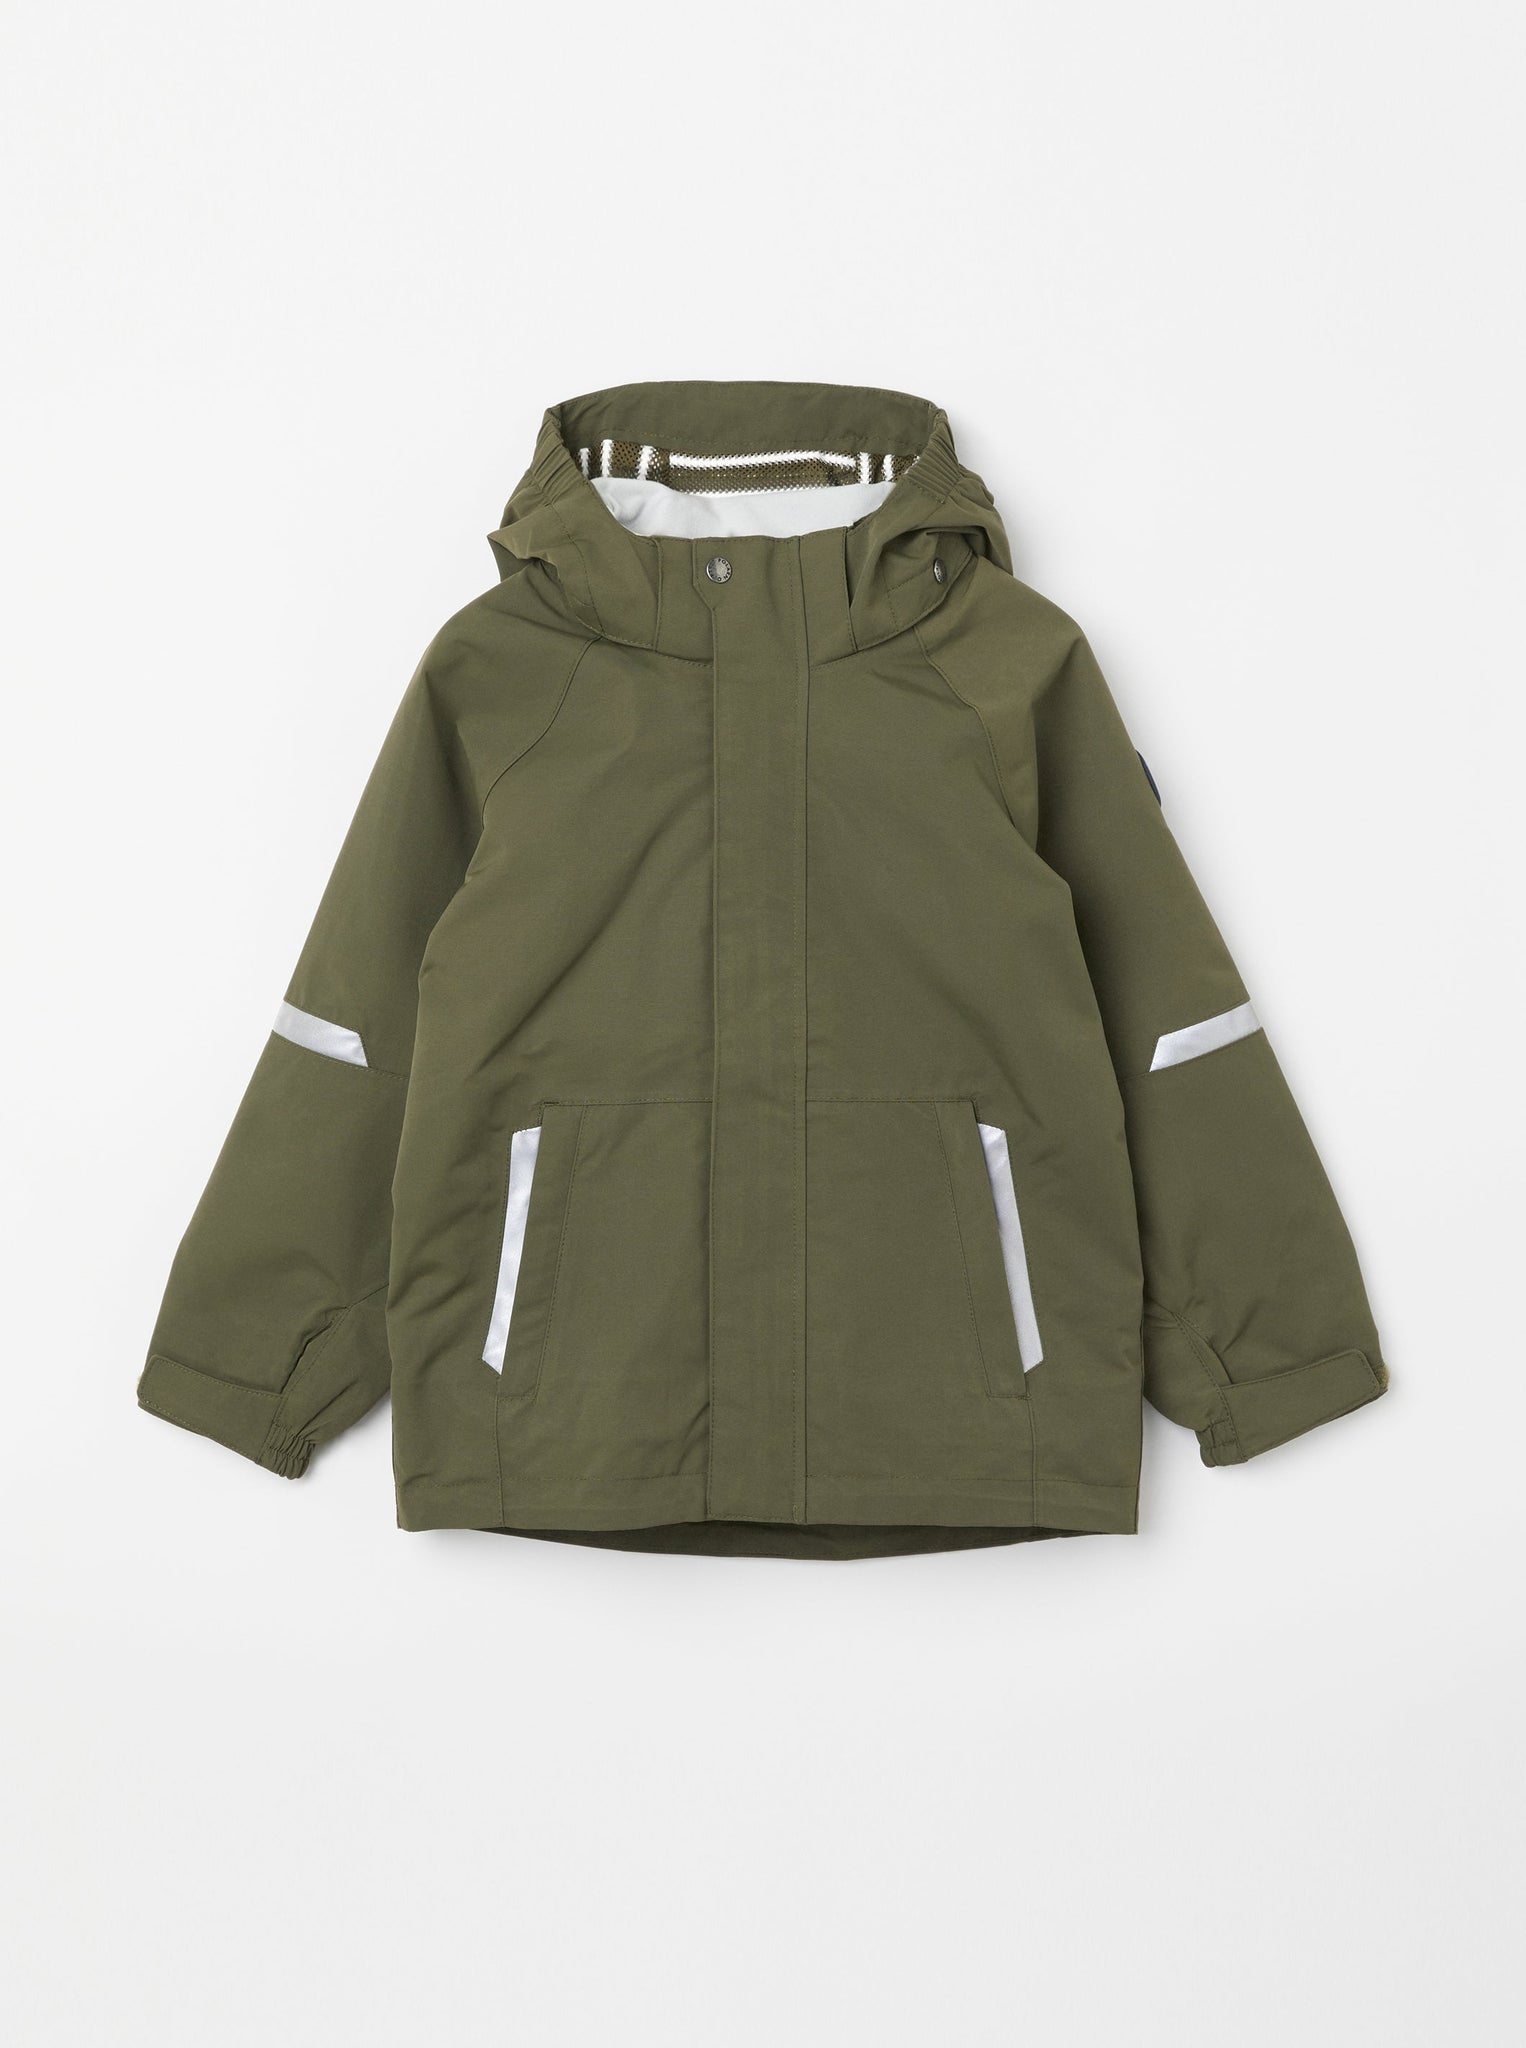 Khaki Kids Waterproof Shell Jacket from the Polarn O. Pyret kidswear collection. Made from sustainable sources.